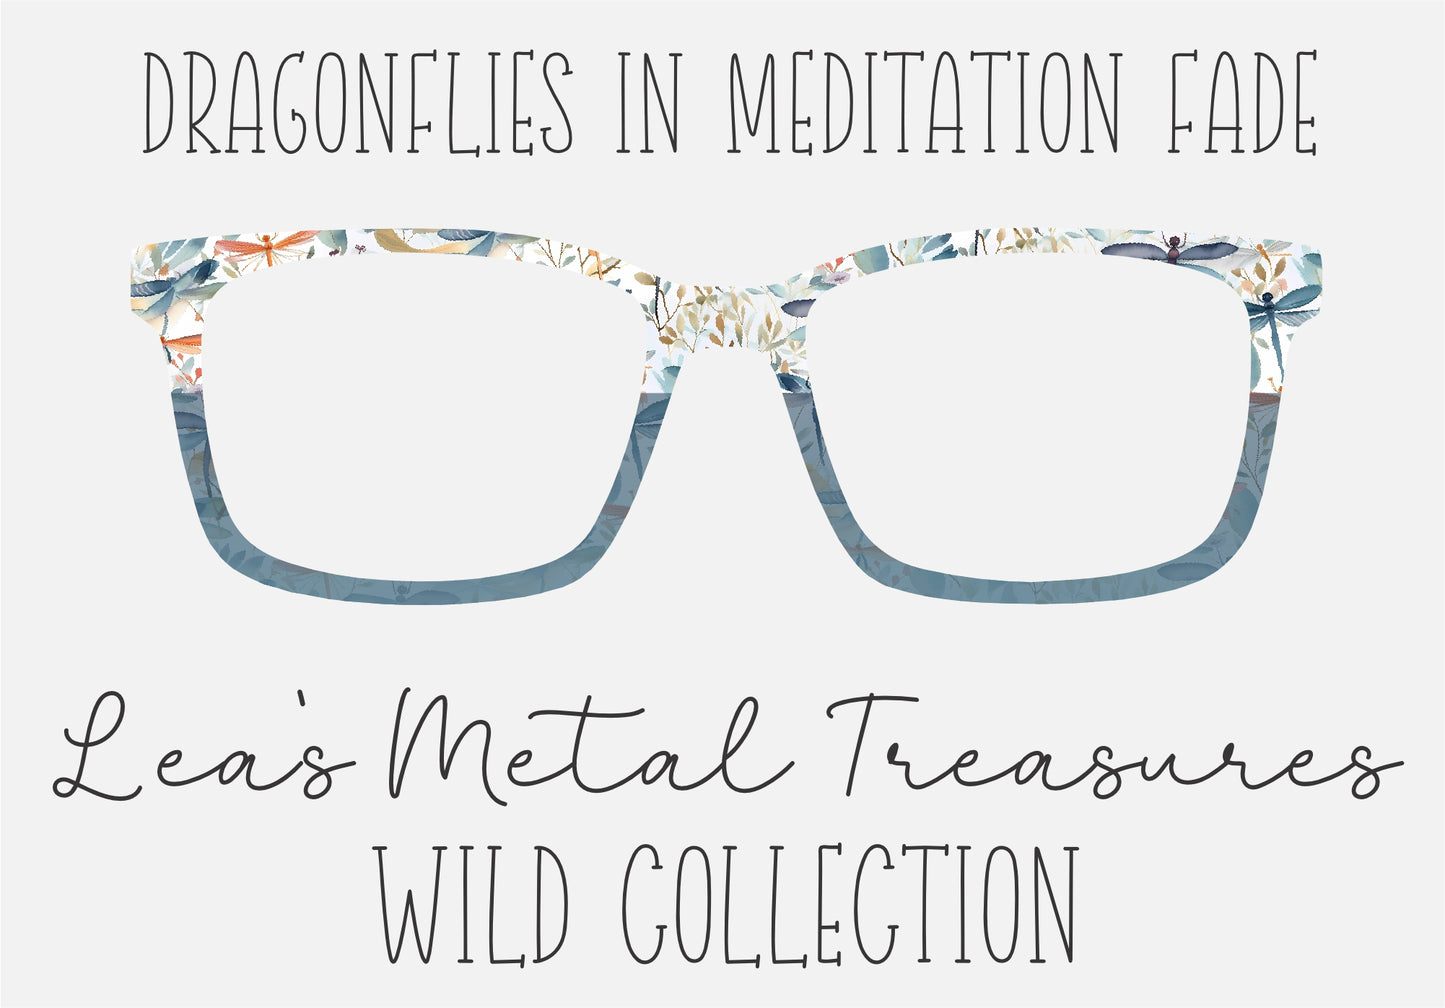 DRAGONFLIES IN MEDITATION FADE Eyewear Frame Toppers COMES WITH MAGNETS